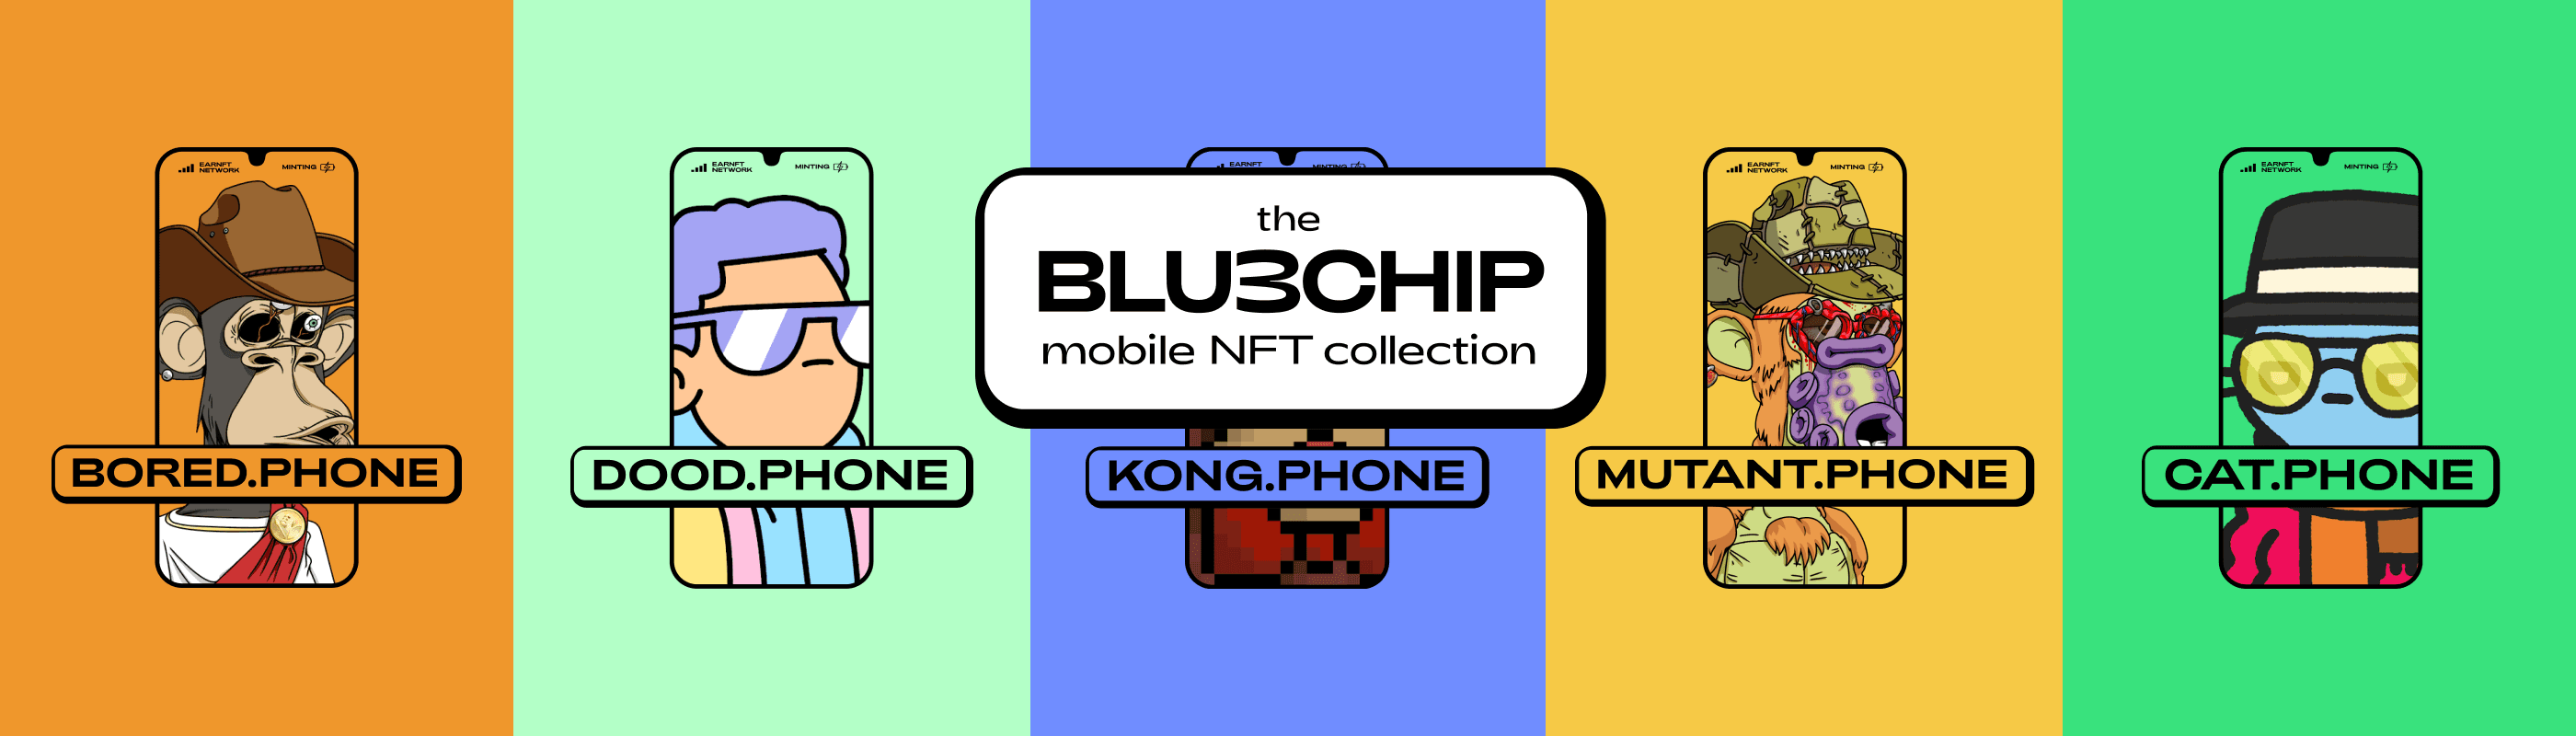 BLU3CHIP Mobile Collection By EARNFT NETWORK